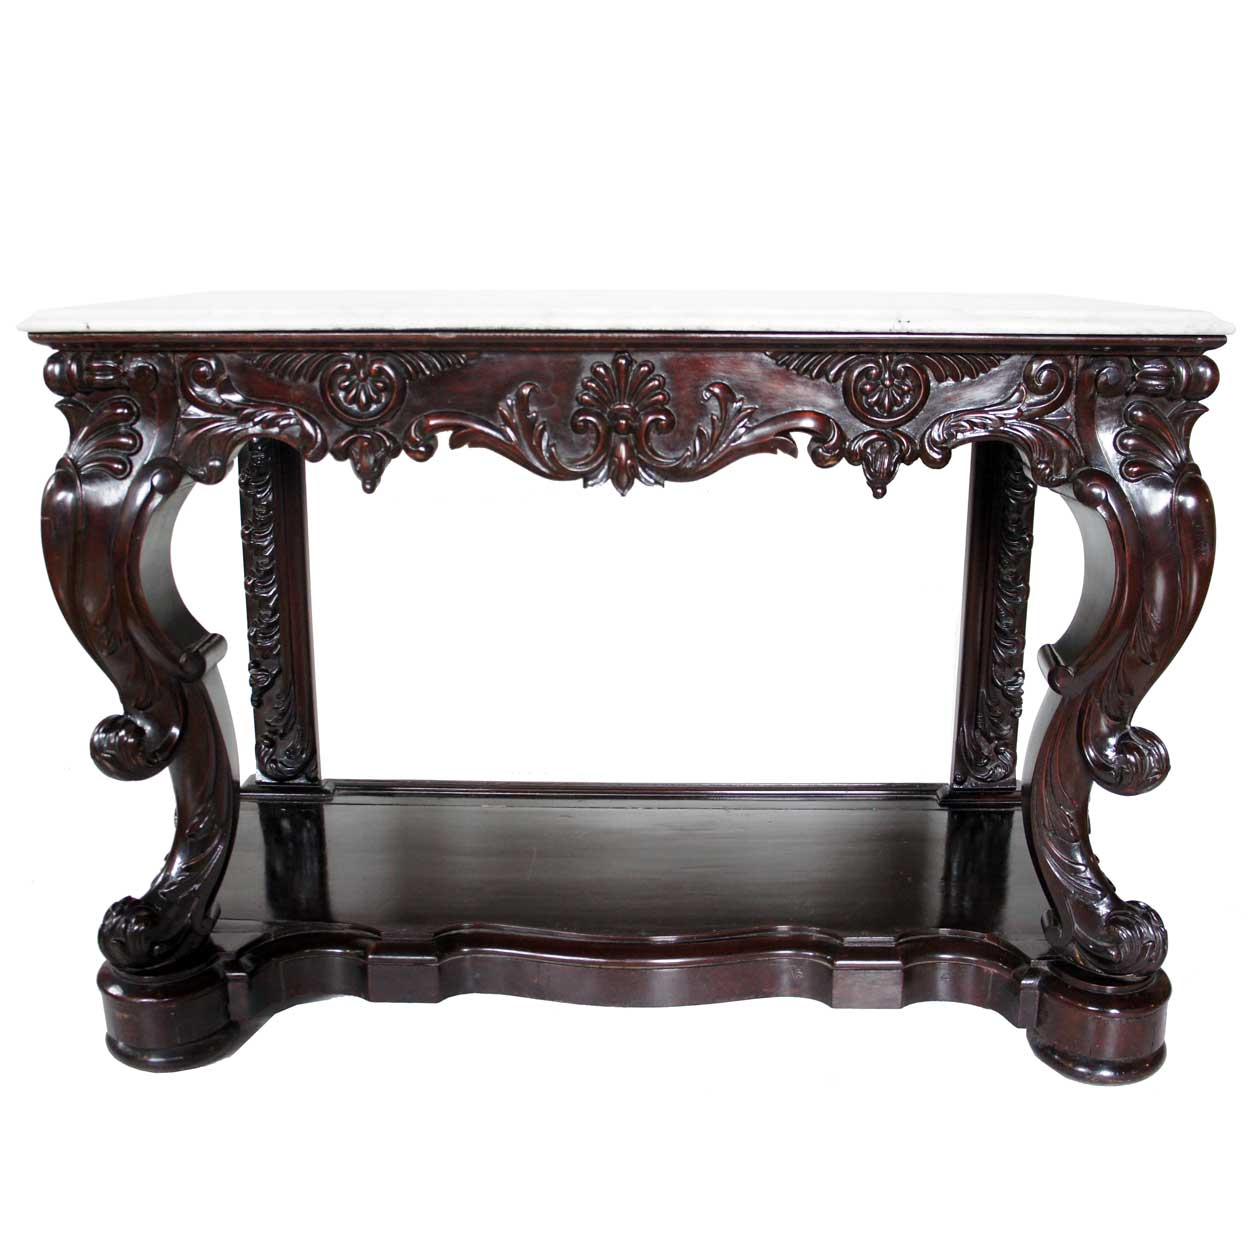 Anglo Indian Rococo Revival Mahogany and Marble Console For Sale